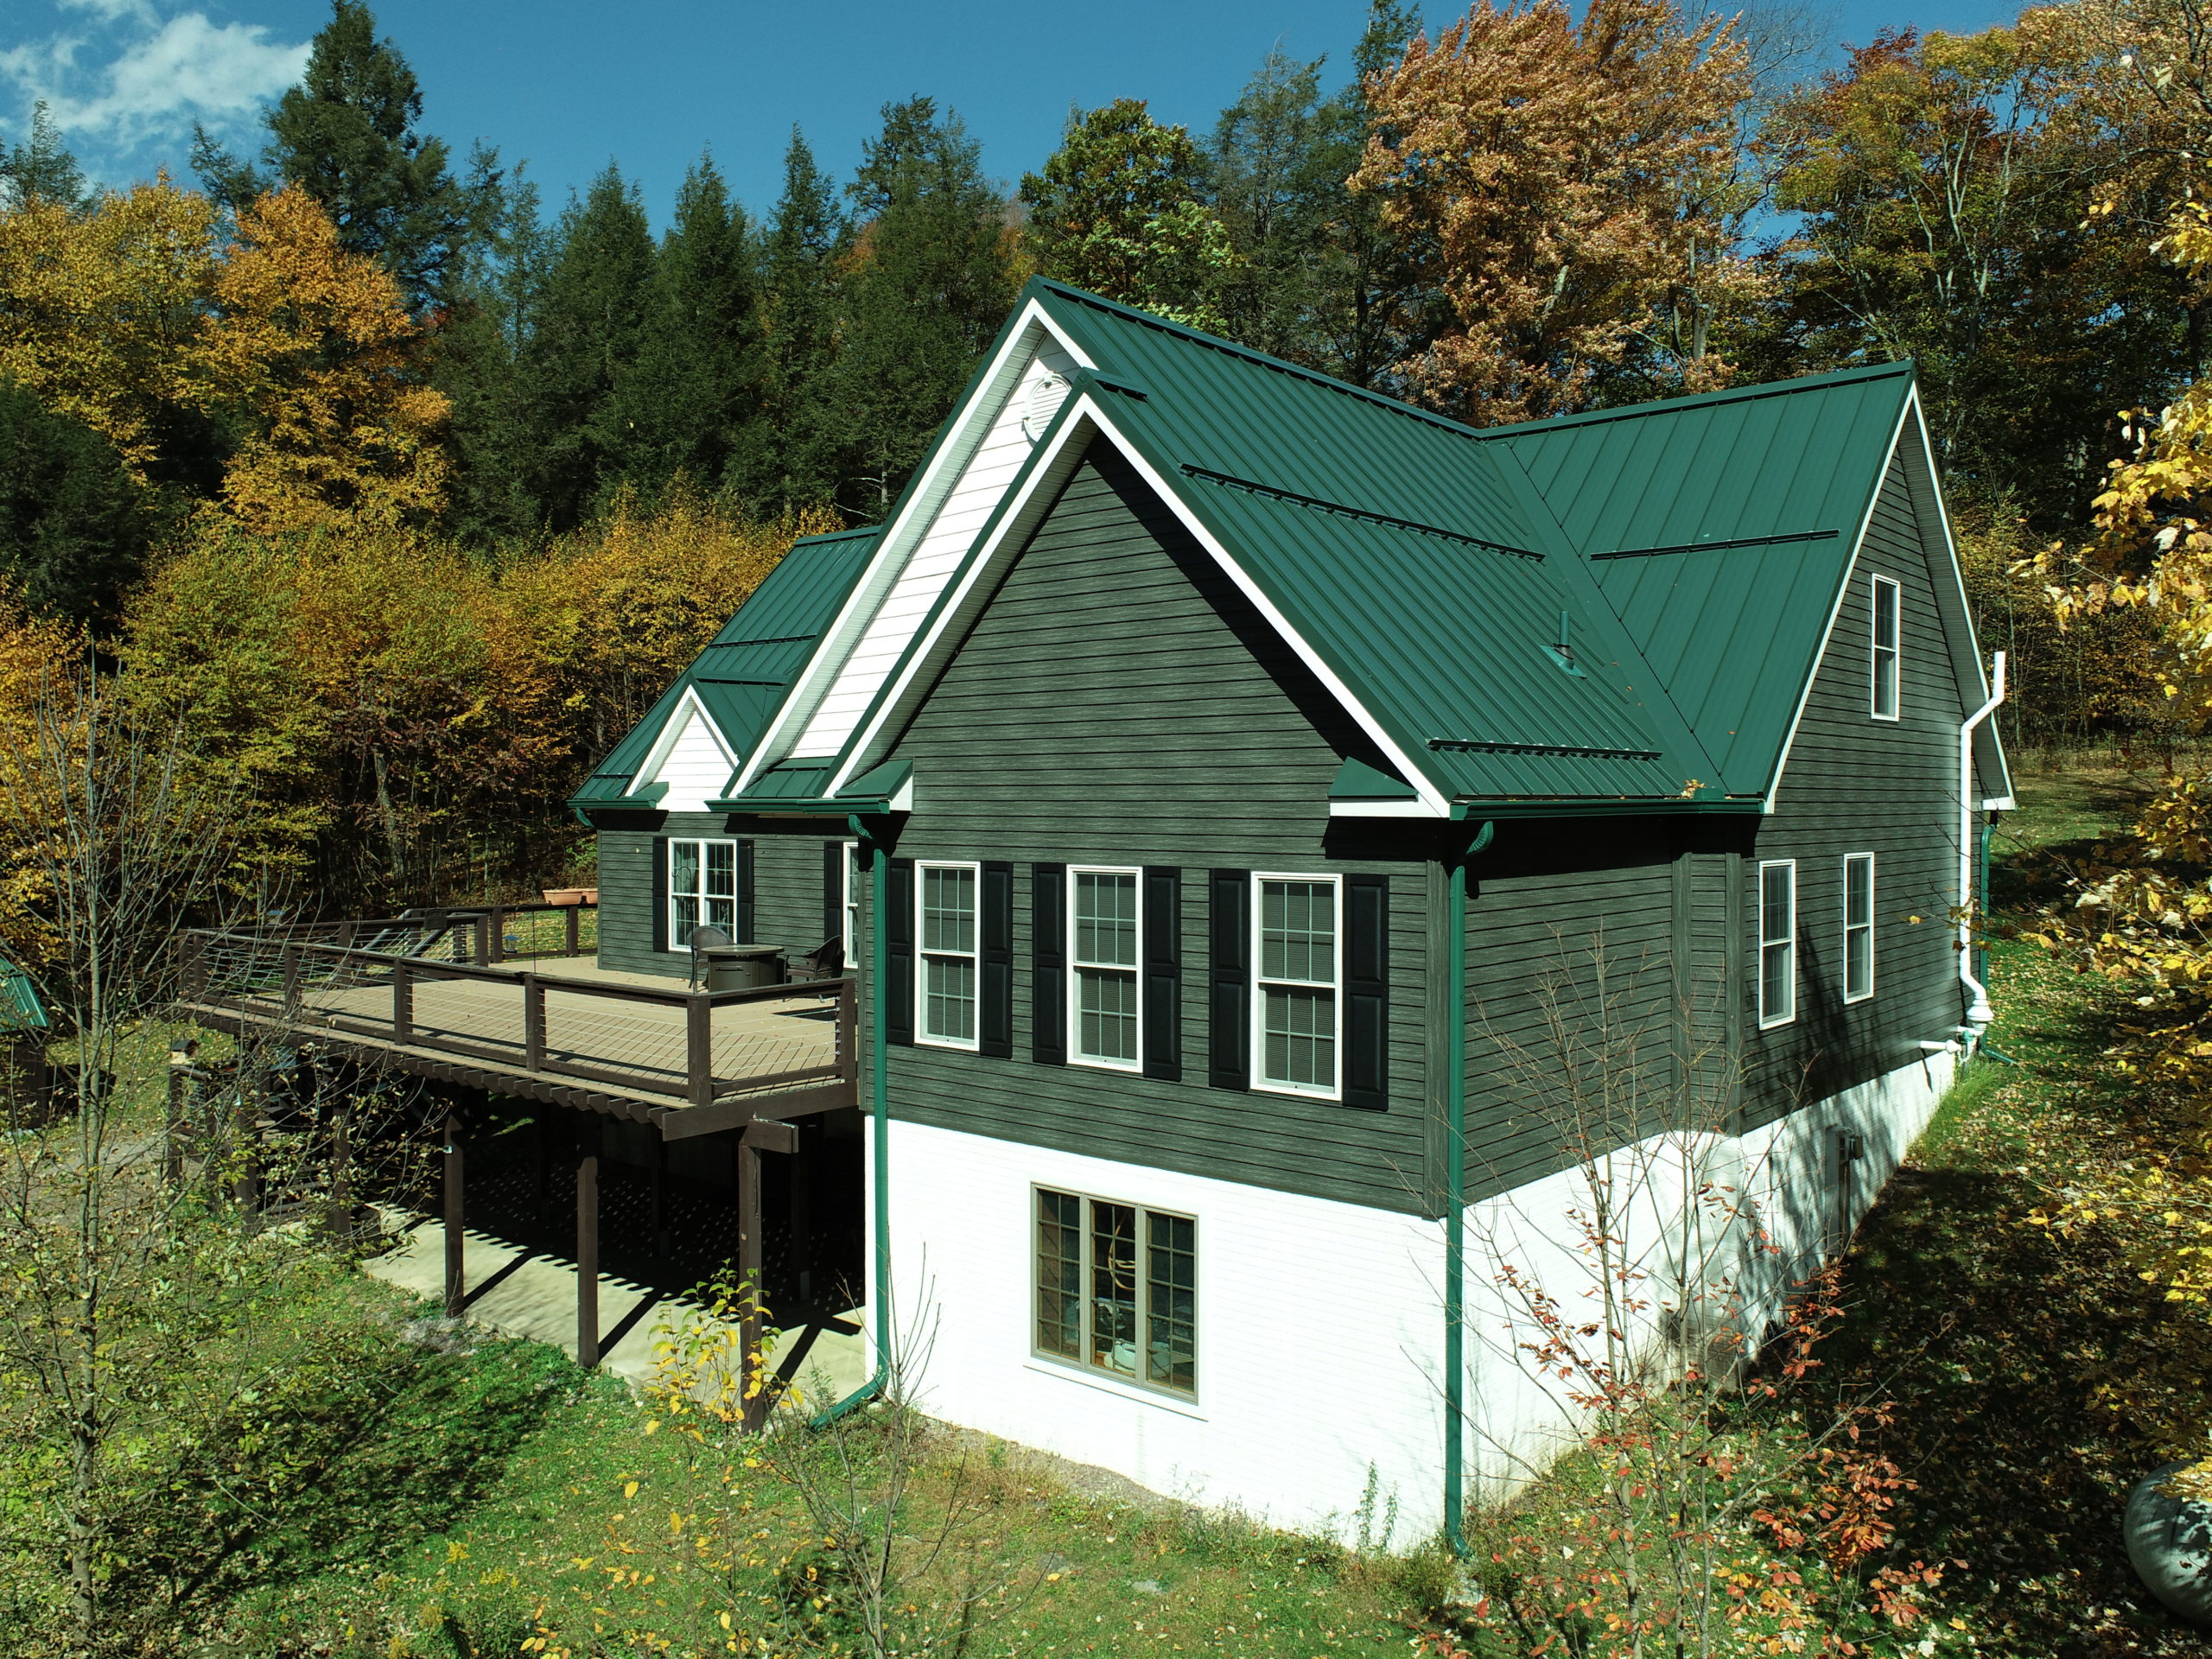 ShieldPro Metals has posts on metal roofing such as this house has on it.